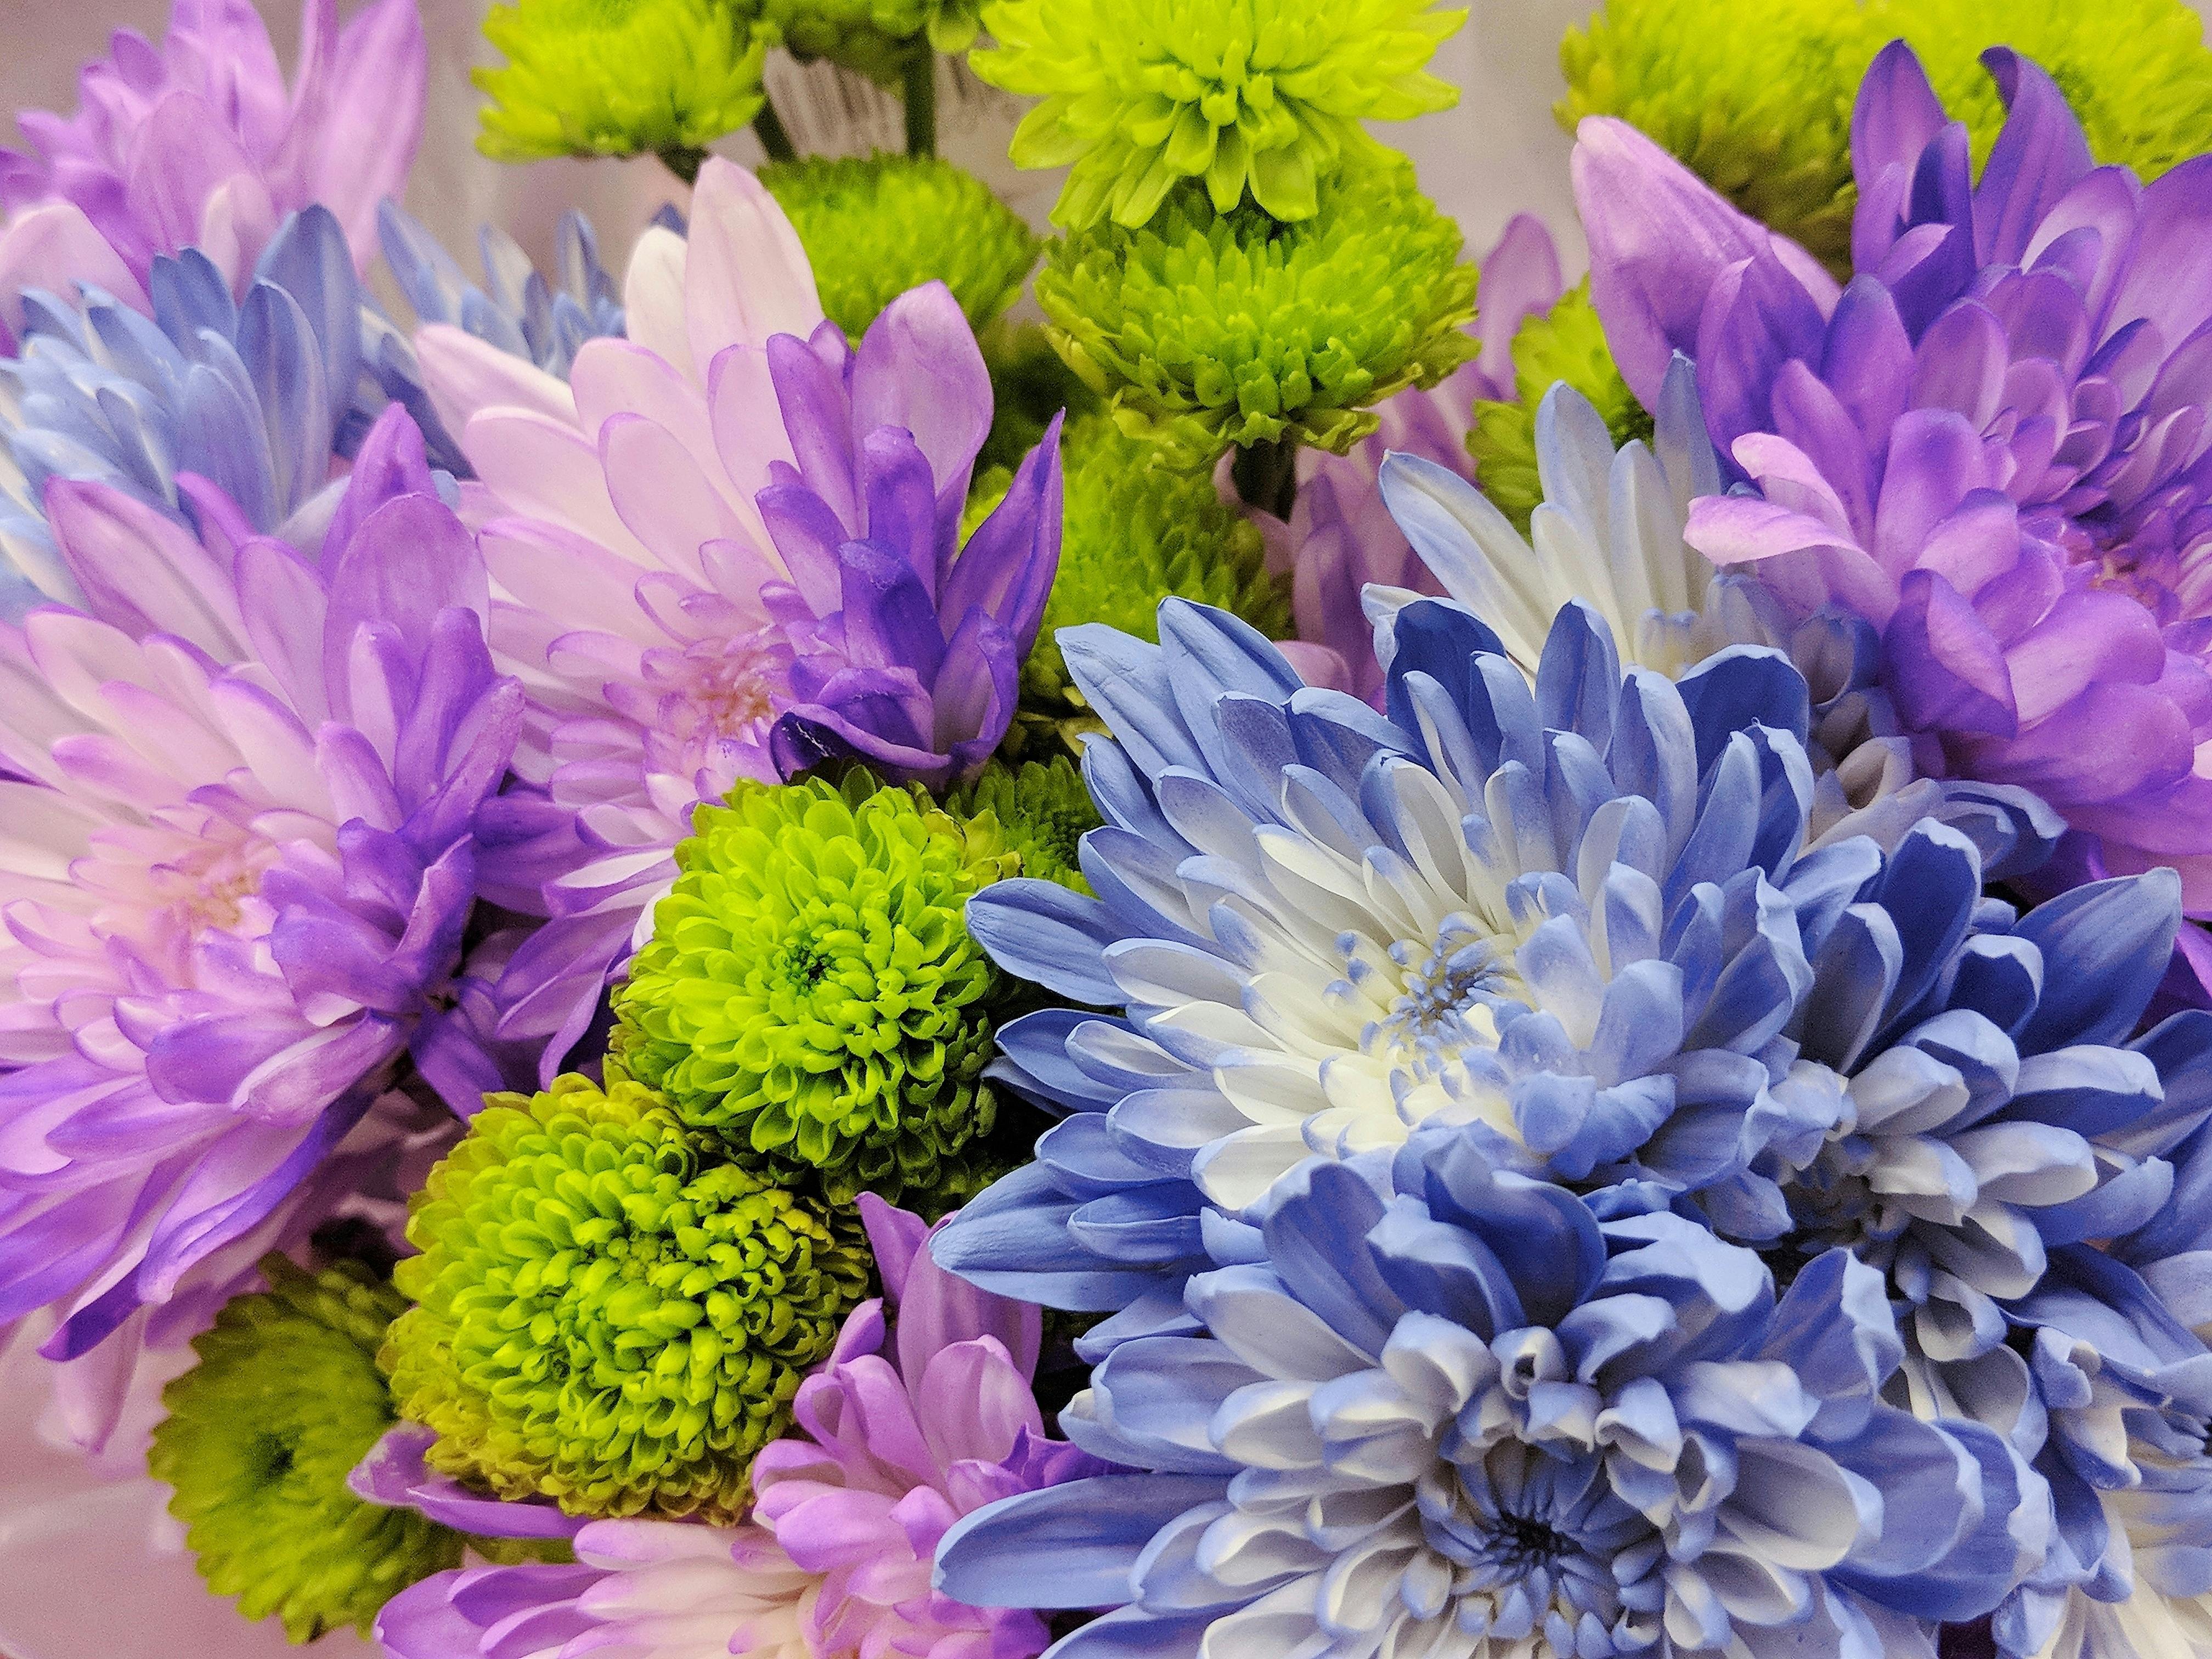 Free stock photo of flower bouquet, lavender flowers, purple and green